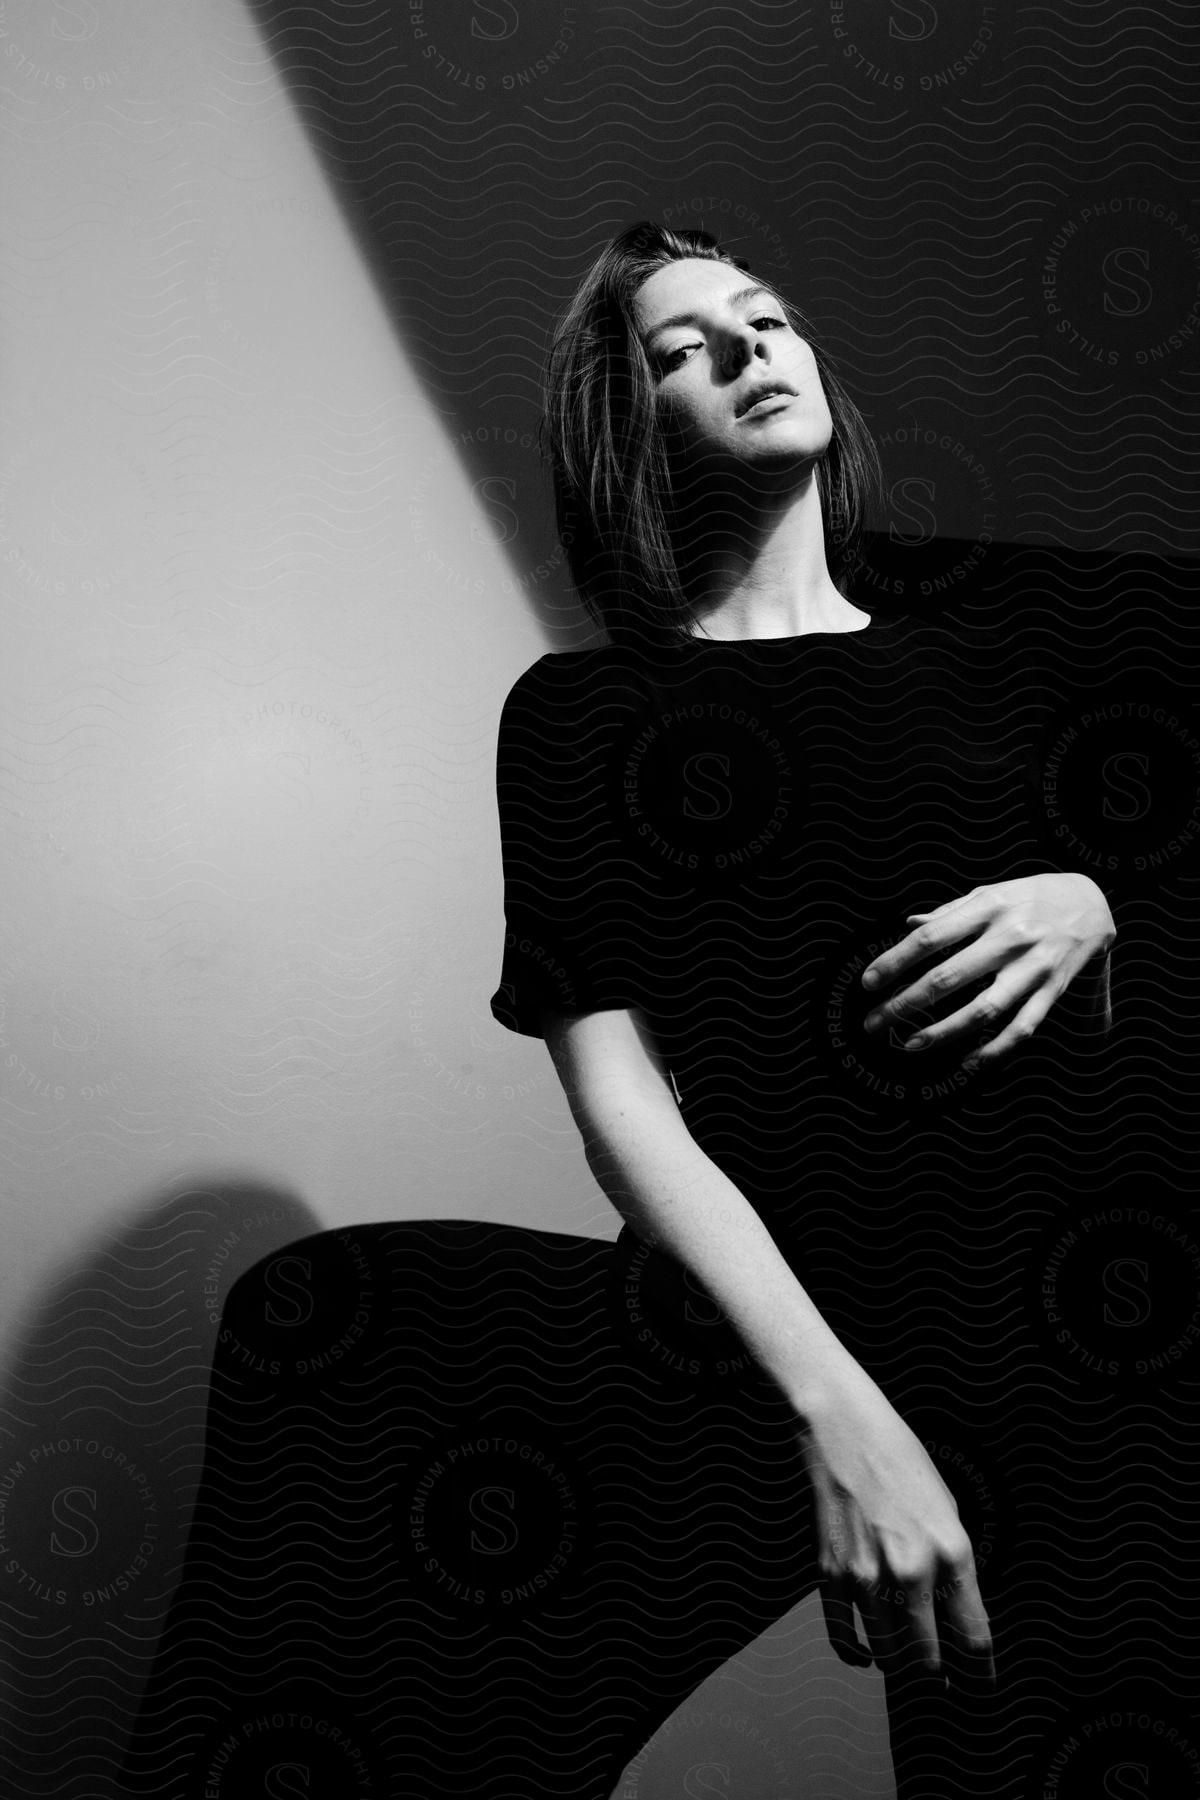 Woman standing in a black dress posing for a black and white portrait